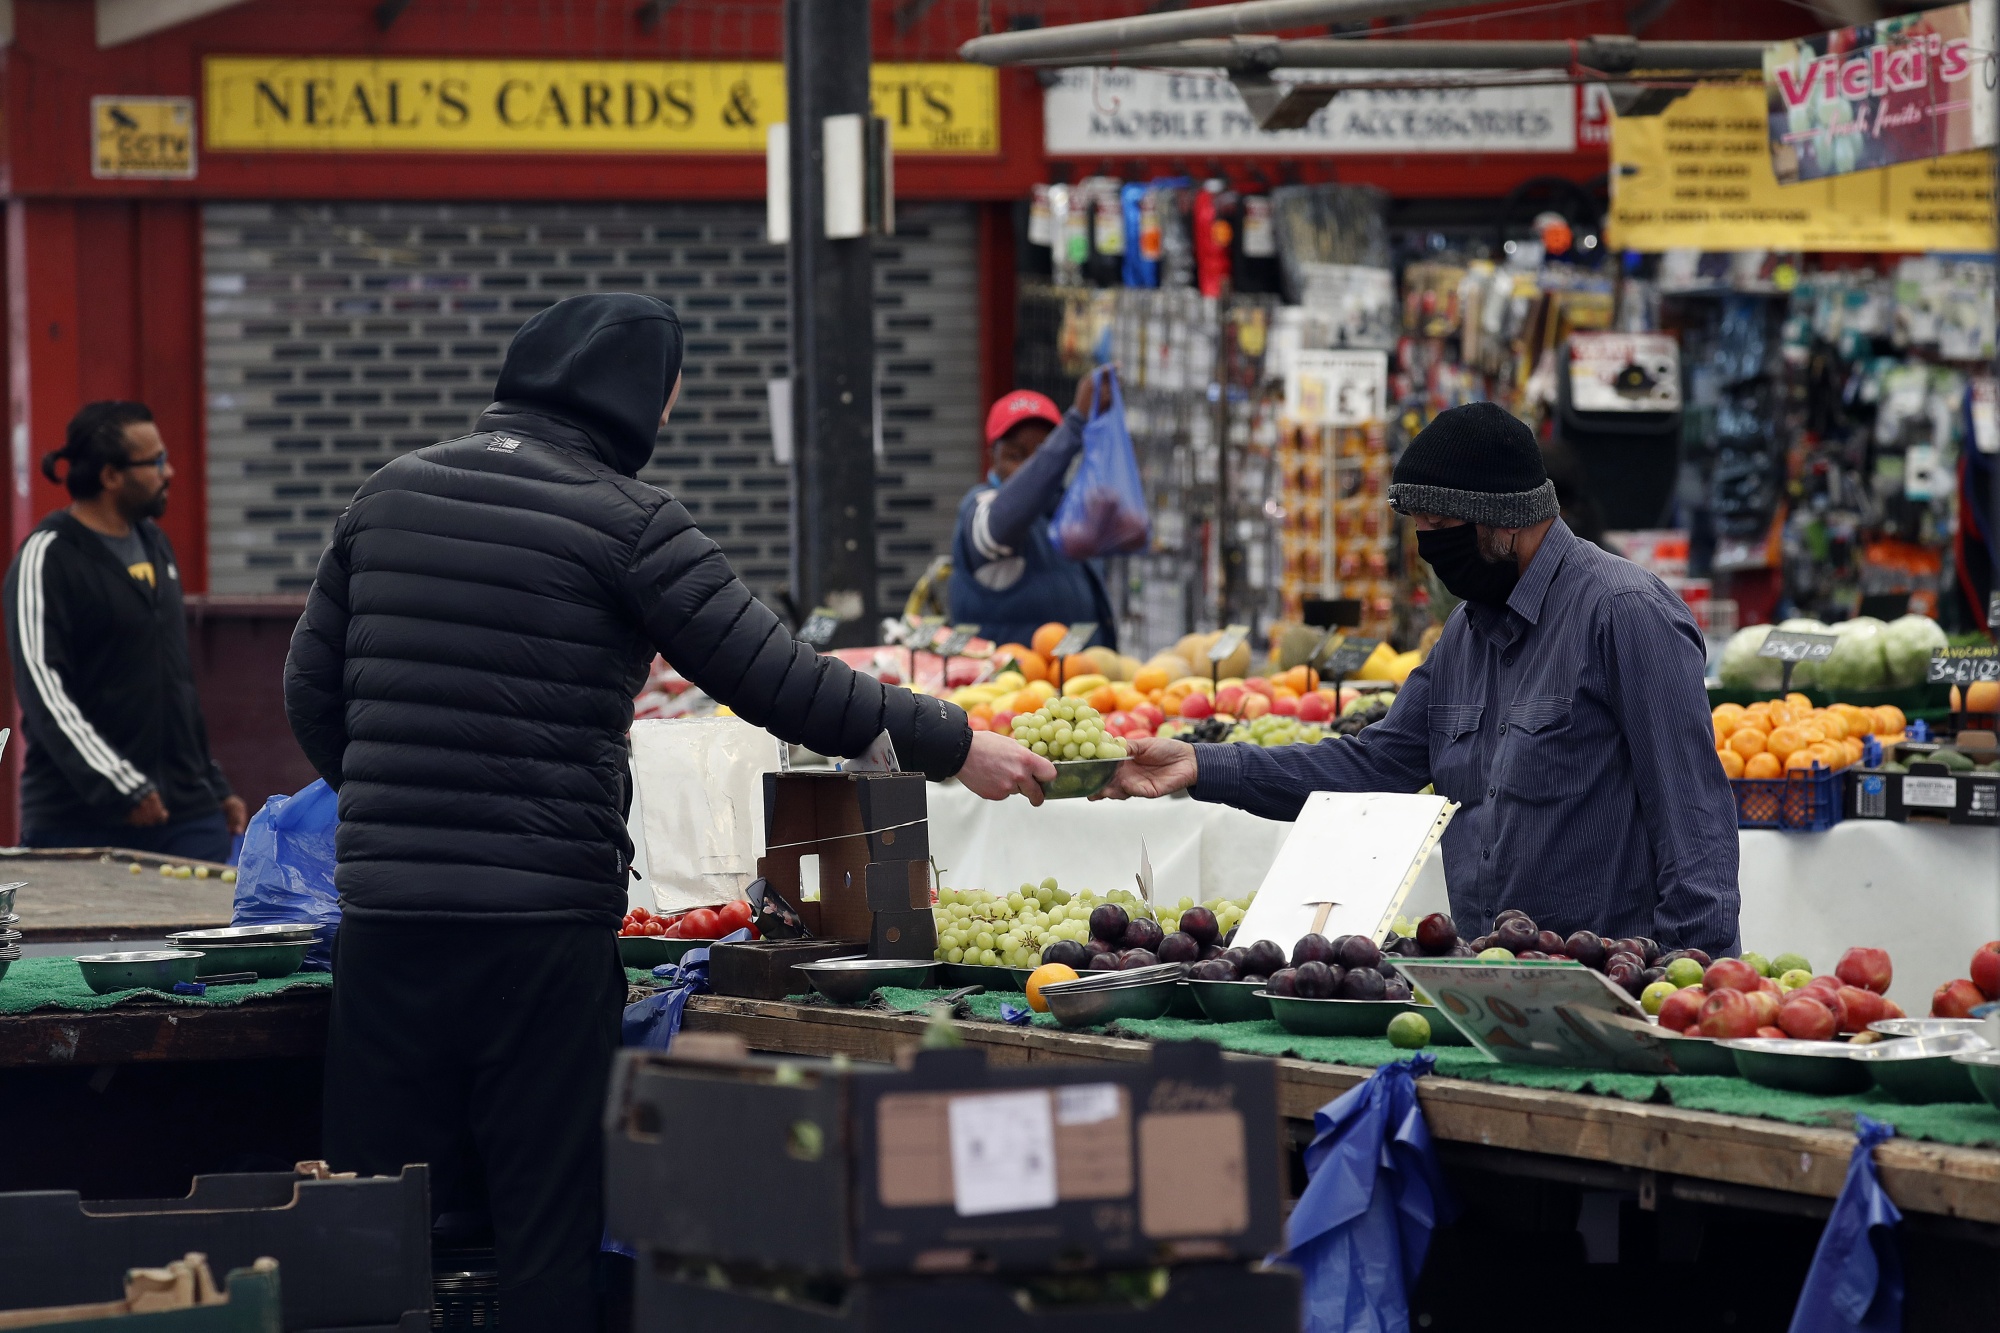 Supermarket expansion means trouble in store for France's local shopkeepers, Retail industry